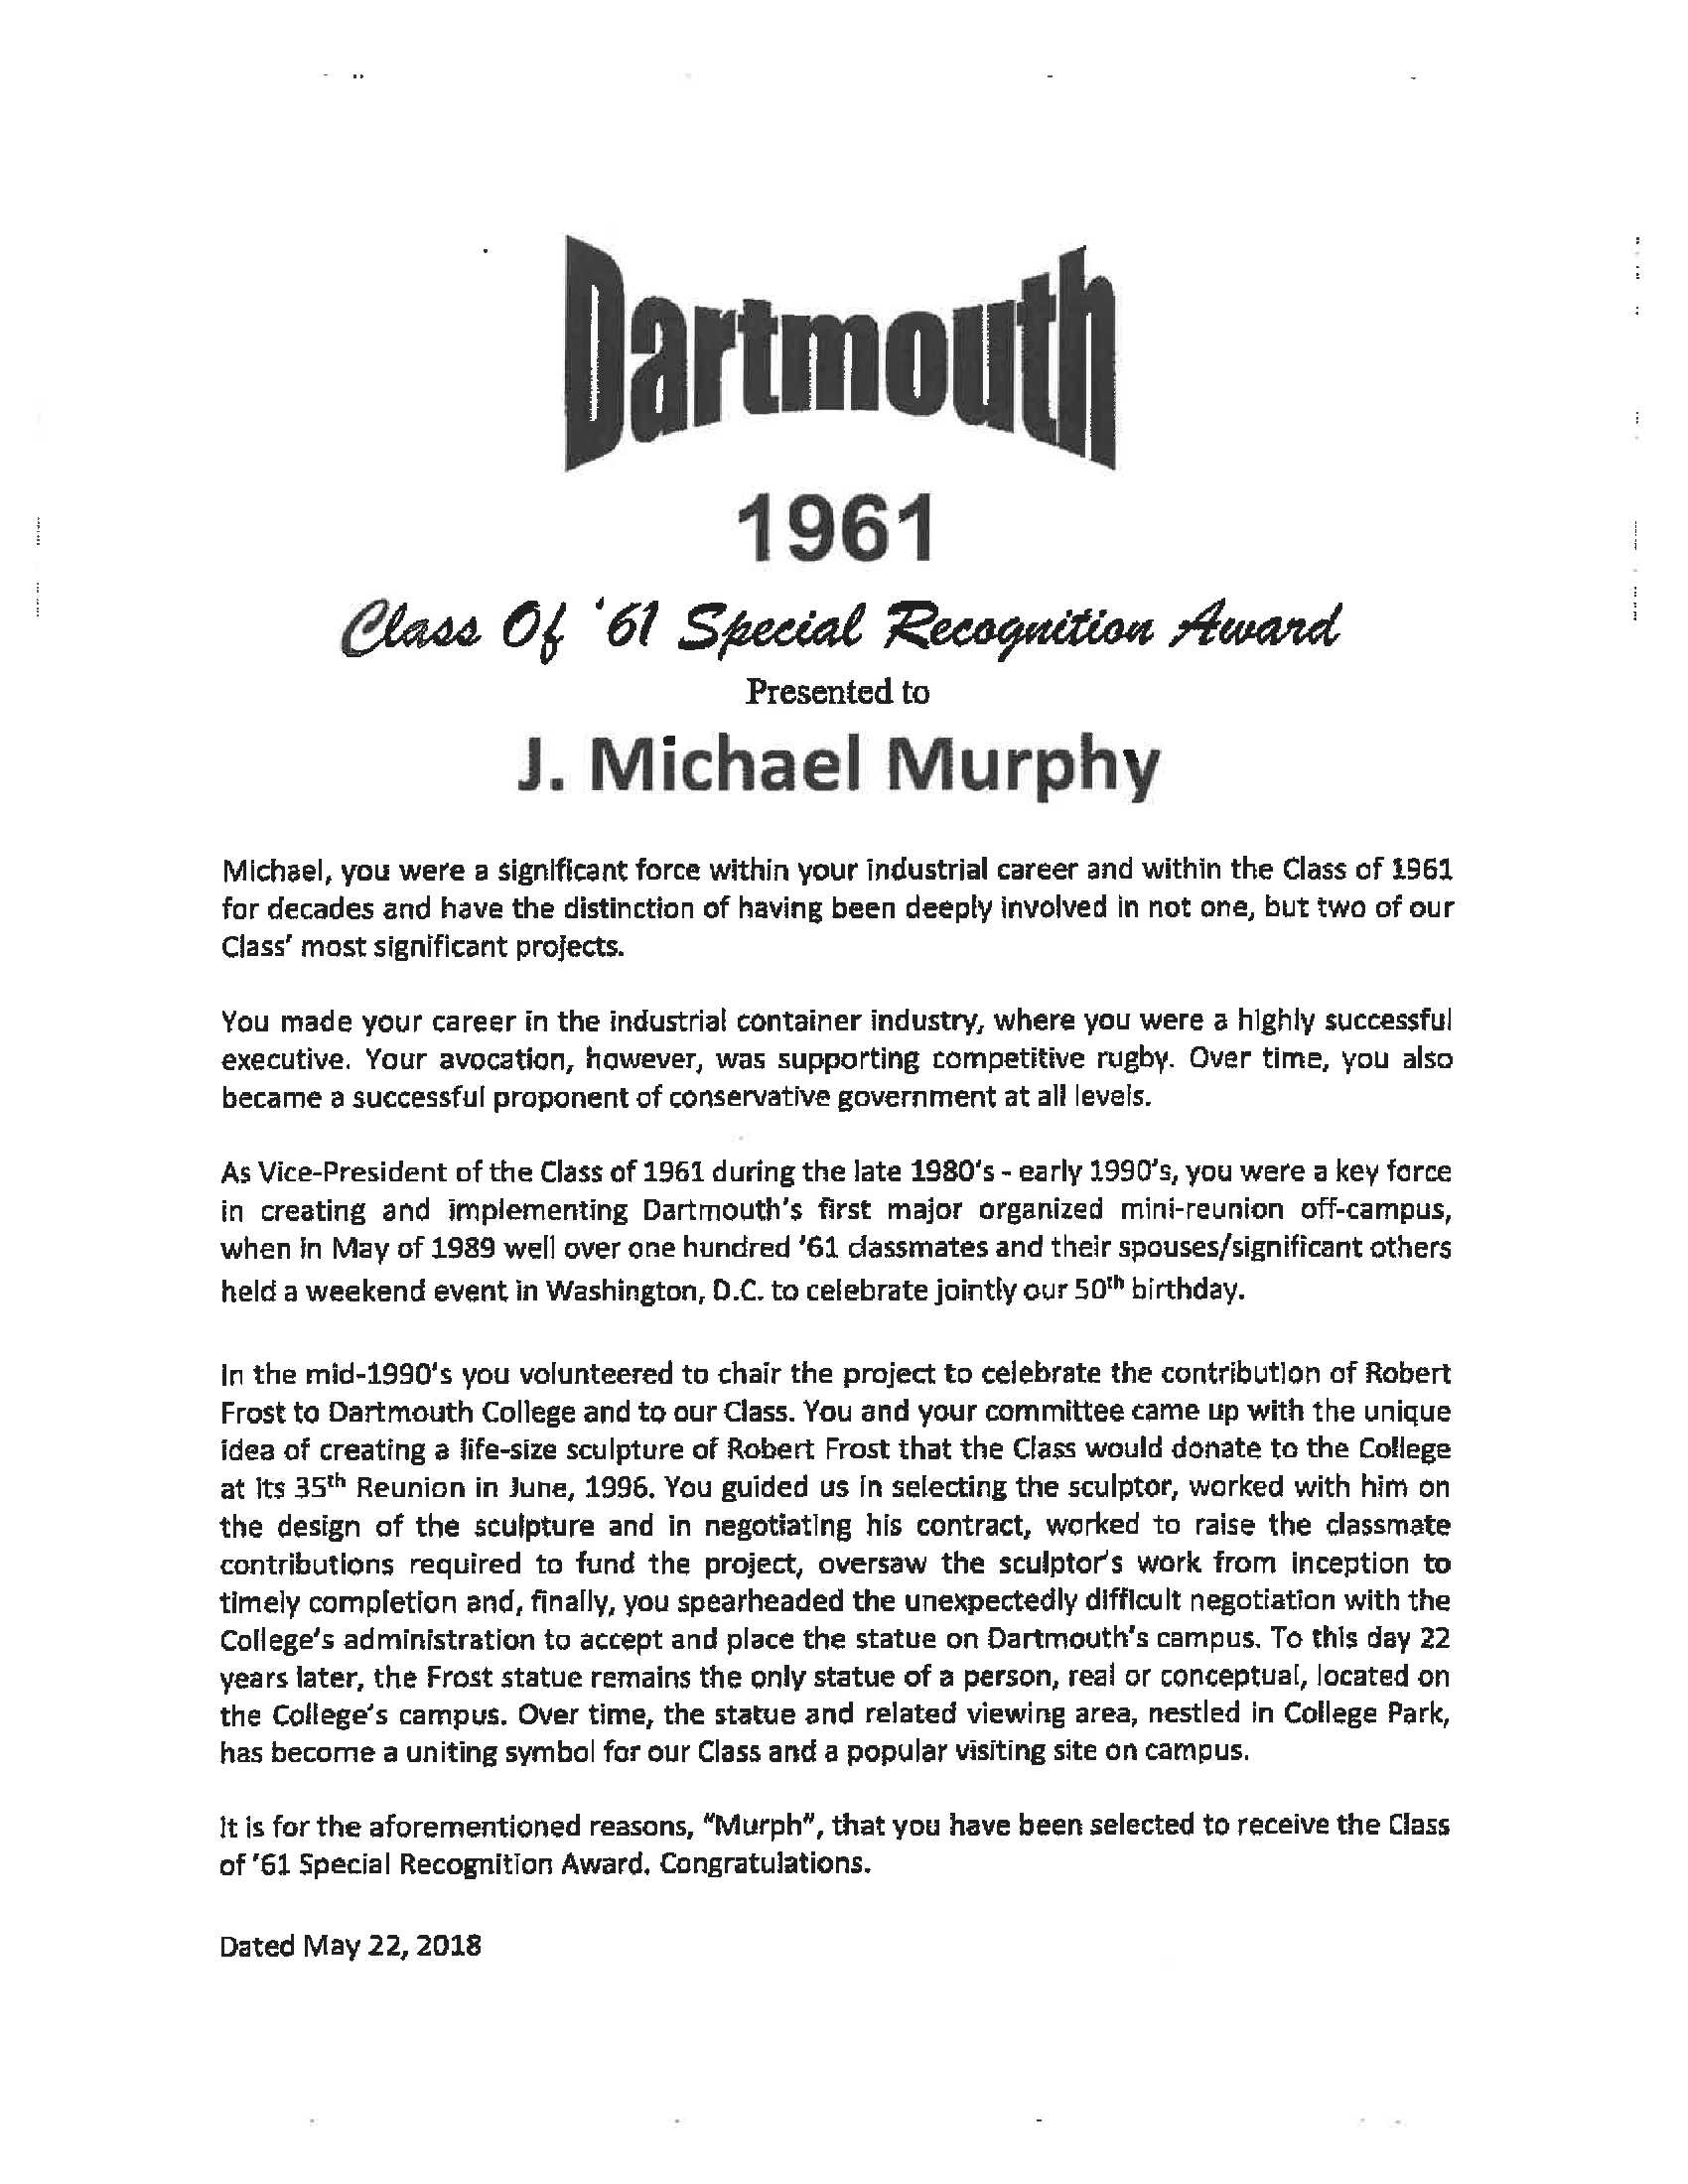 Murphy Special Recognition